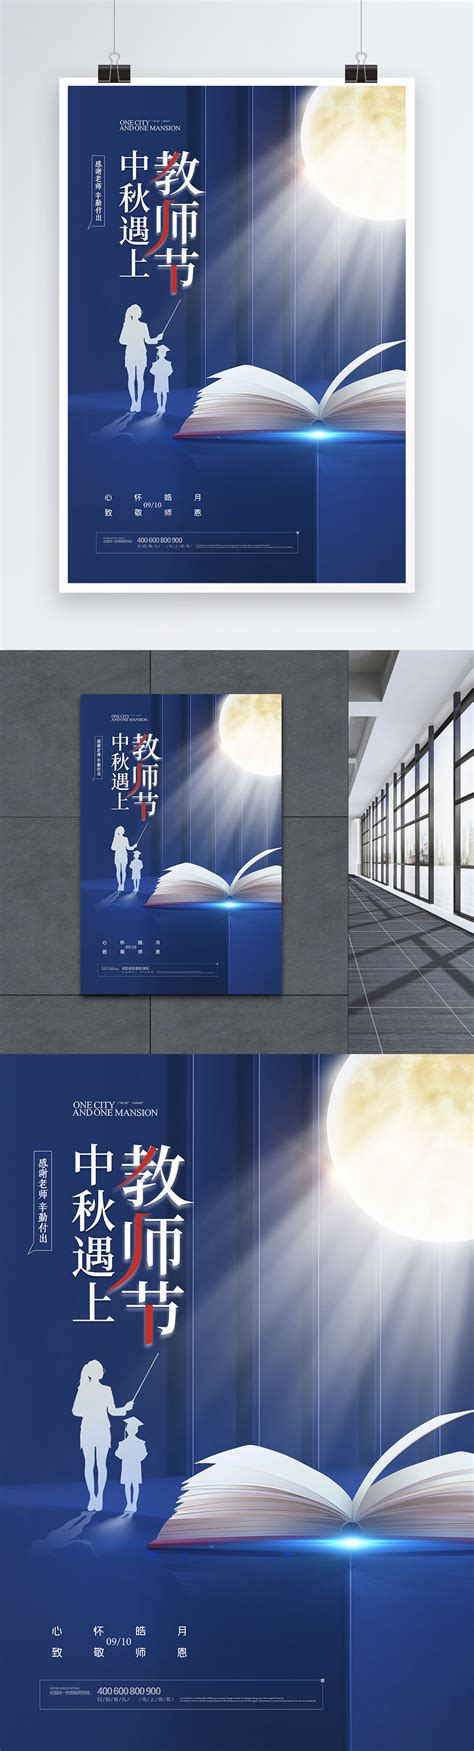 Premium simple teachers day poster template image_picture free download 402181314_lovepik.com